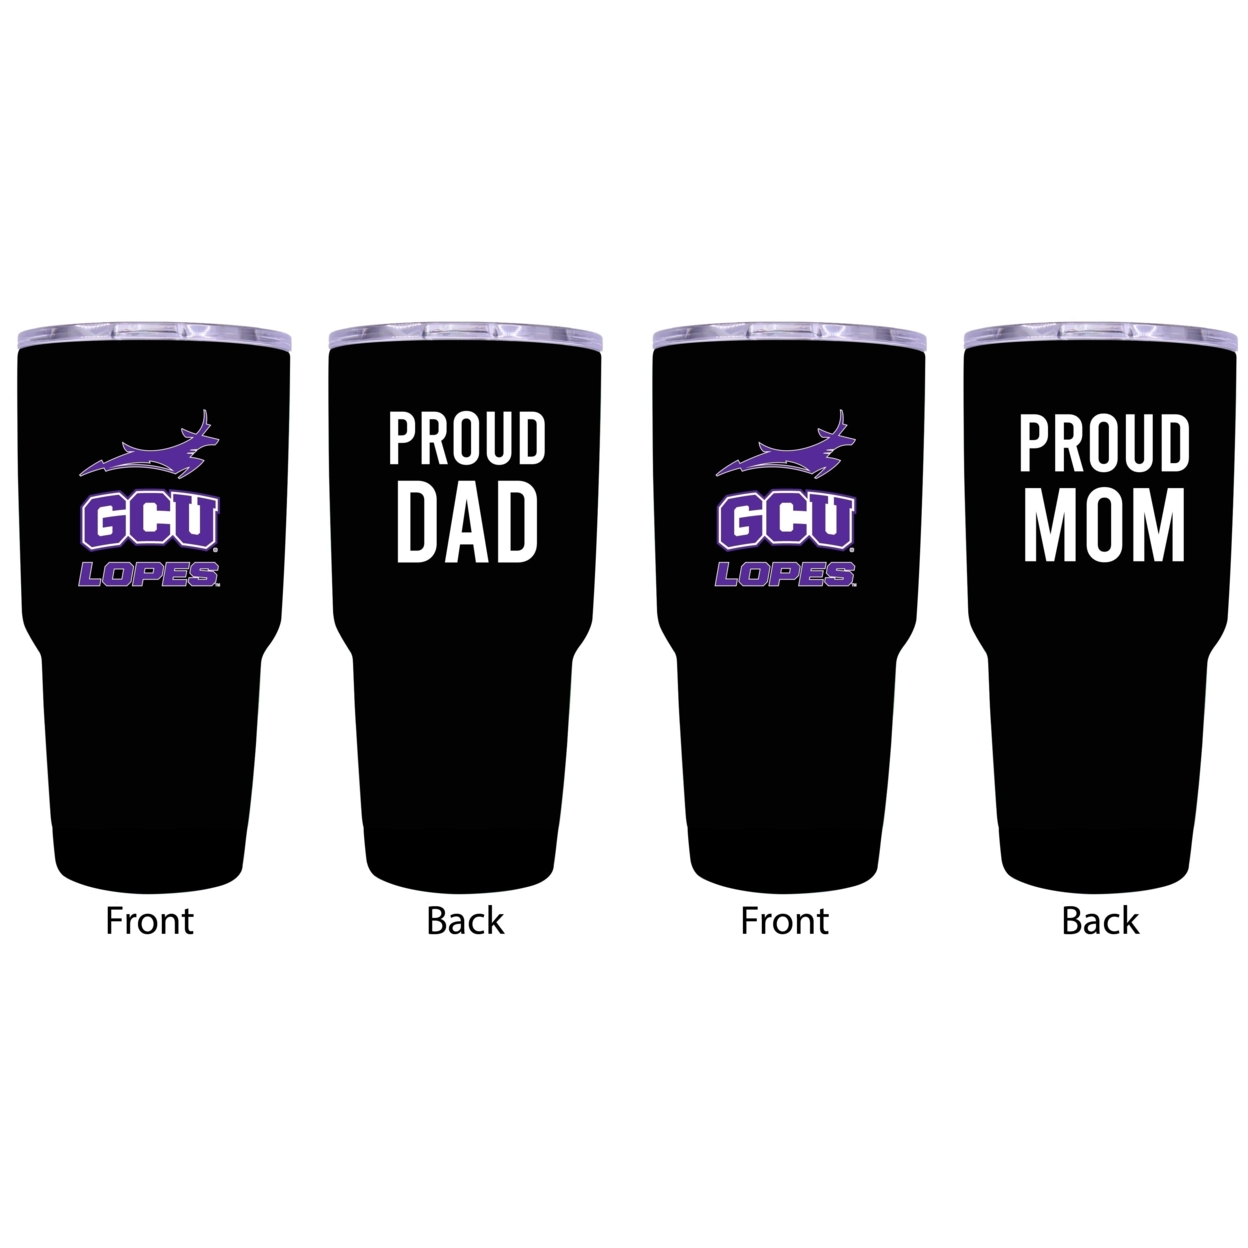 Grand Canyon University Lopes Proud Mom And Dad 24 Oz Insulated Stainless Steel Tumblers 2 Pack Black.